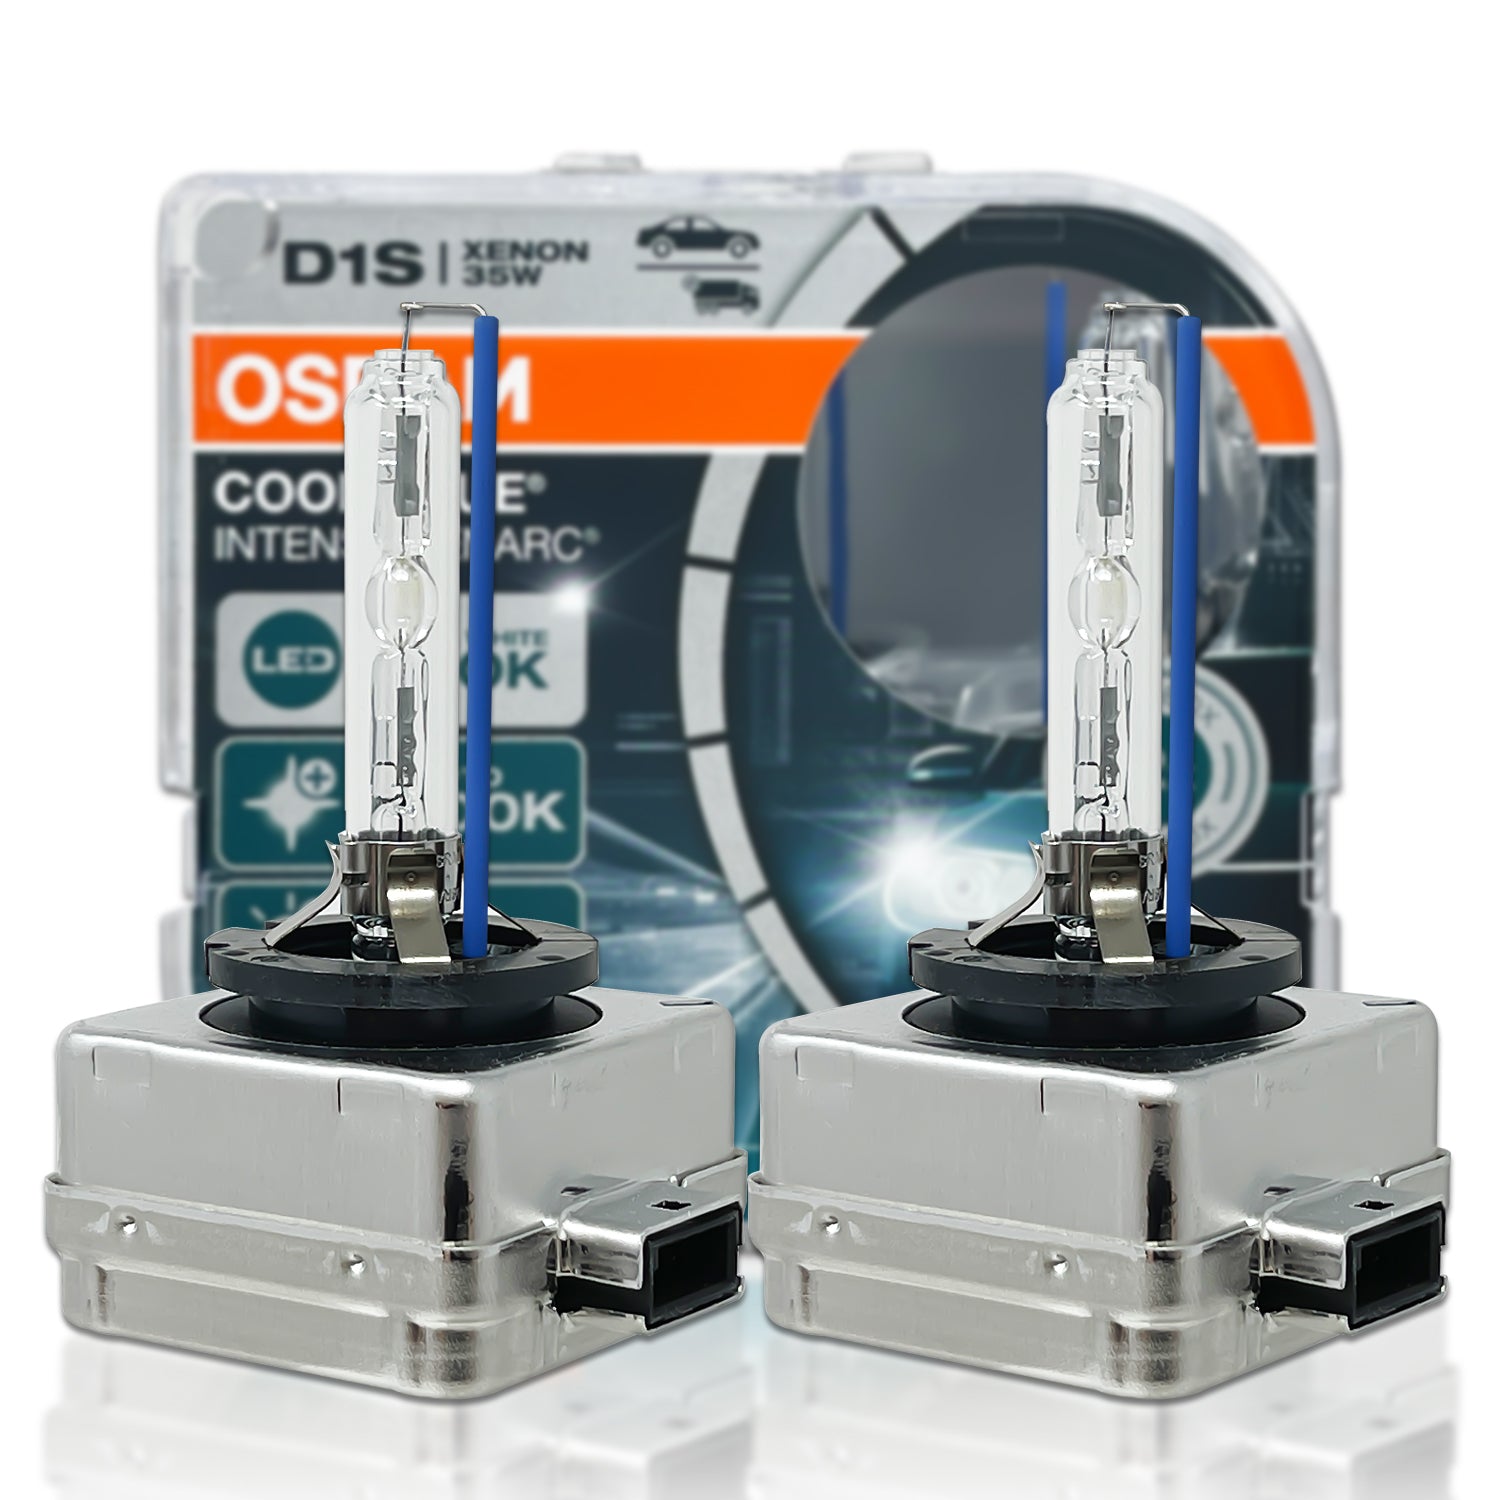 OSRAM COOL BLUE INTENSE XENON VS STOCK. They do make a difference